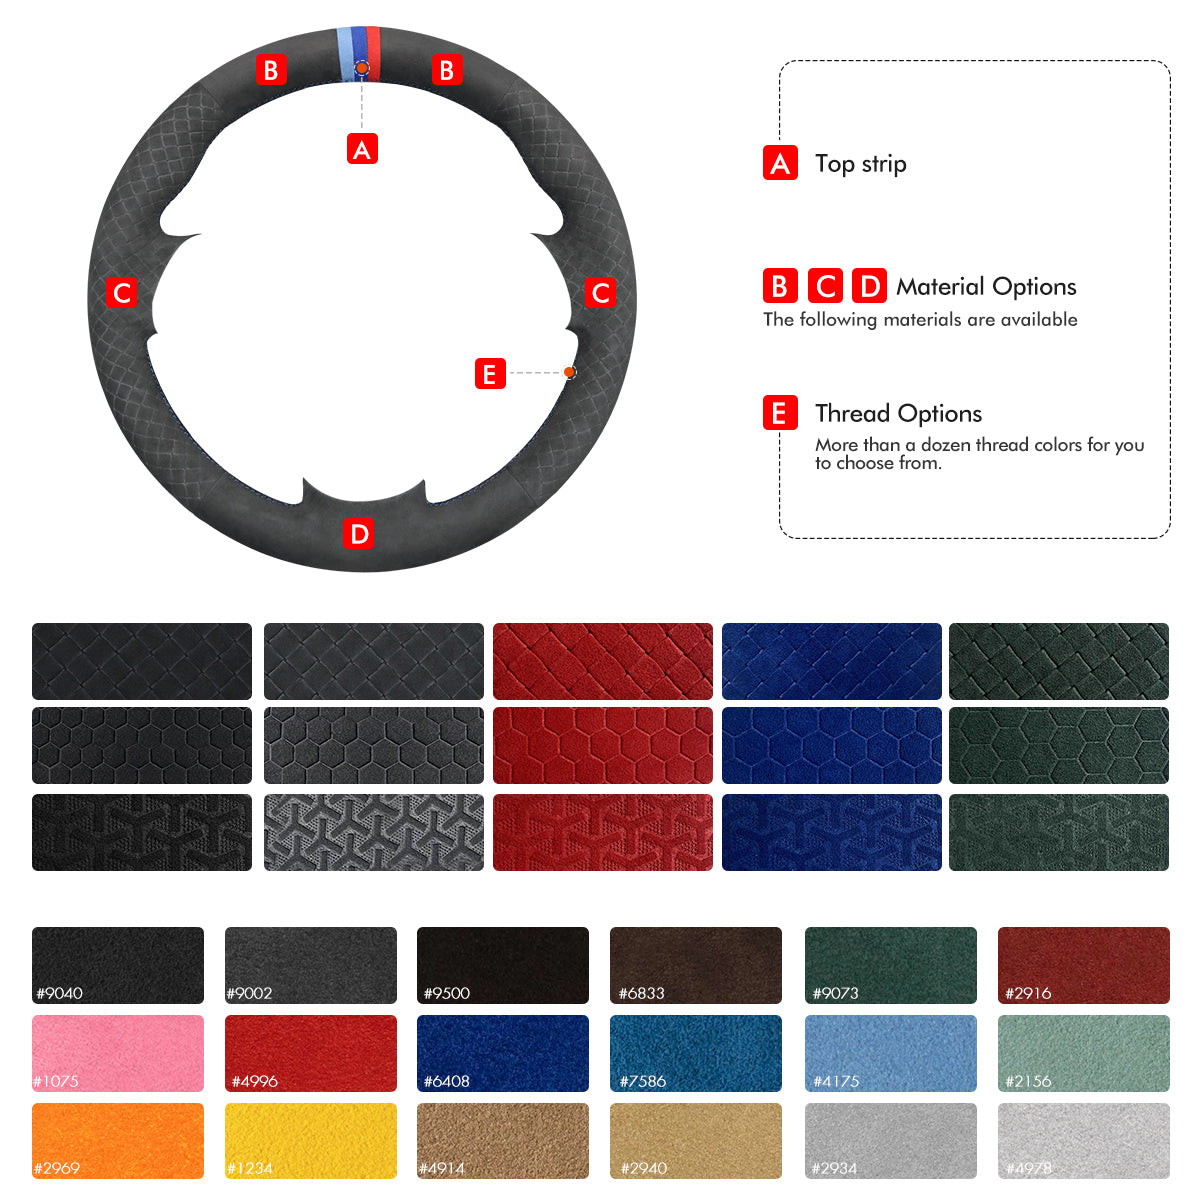 MEWANT Leather Suede Material Car Steering Wheel Cover for Kia Rio 201 – Mewant  steering wheel cover